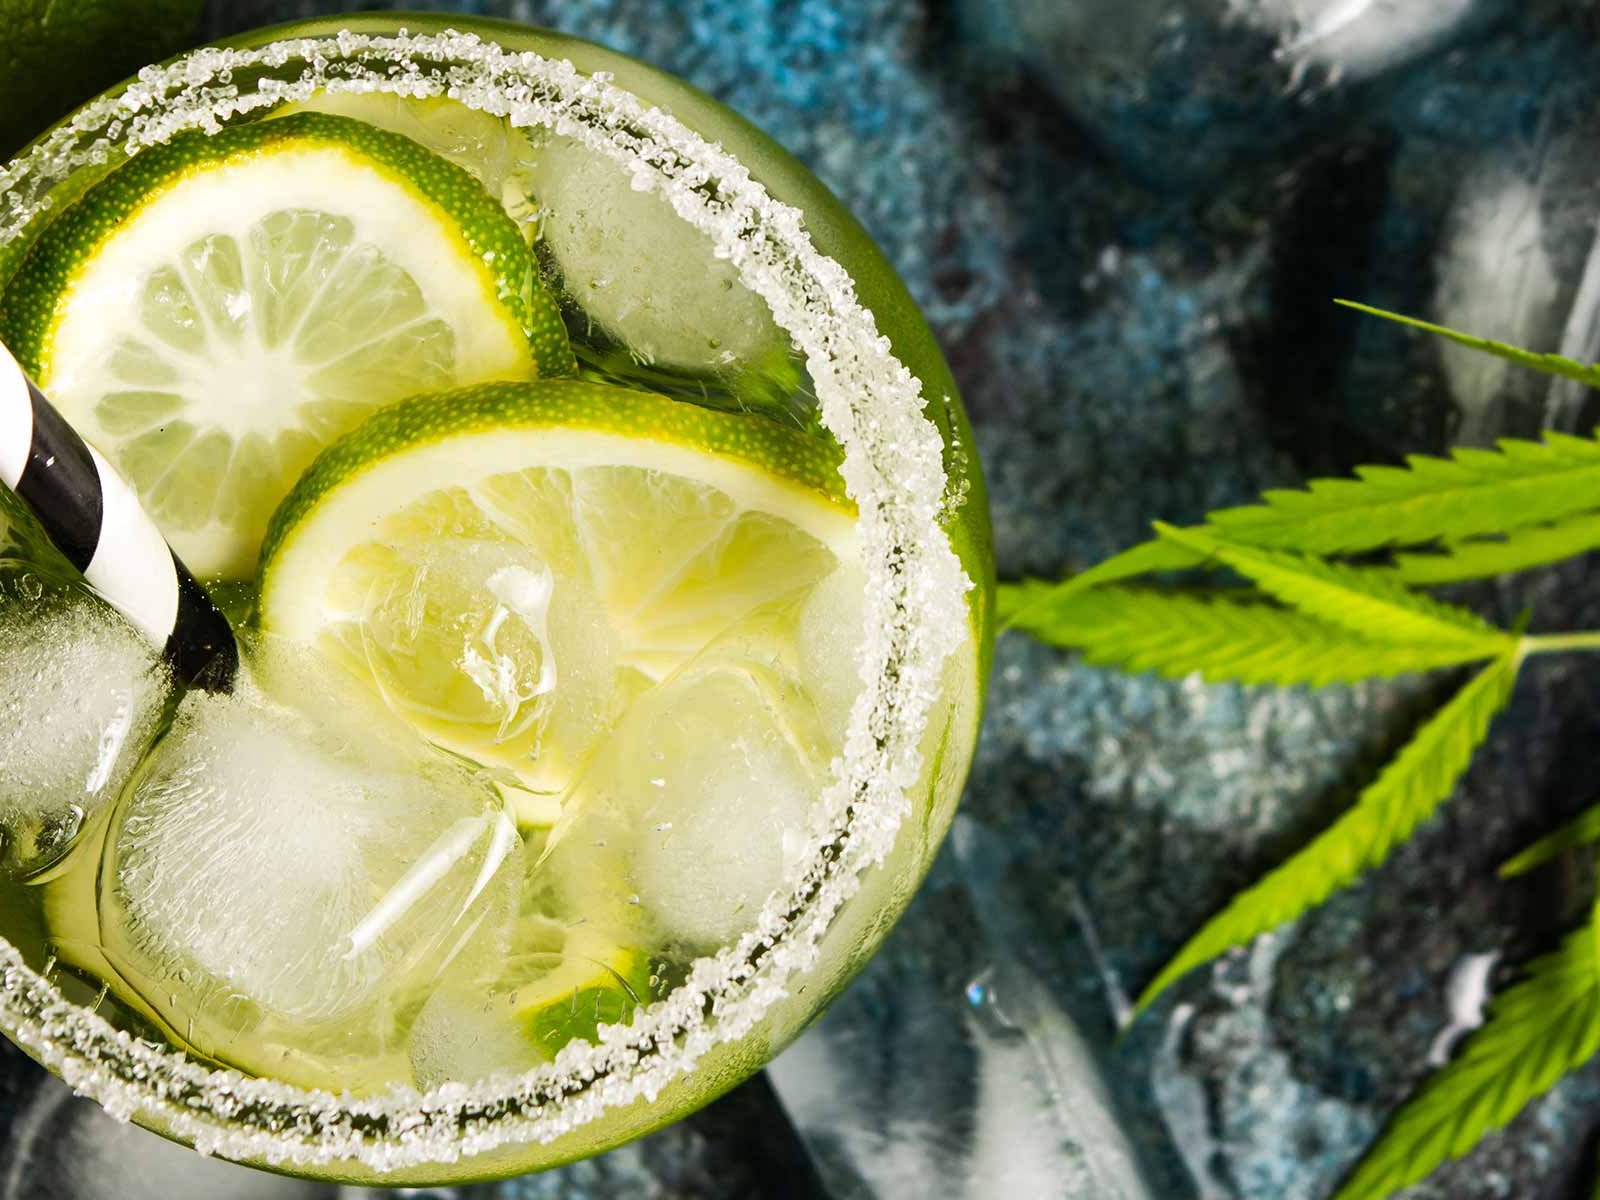 Cannabis cocktails - the latest New York trend.